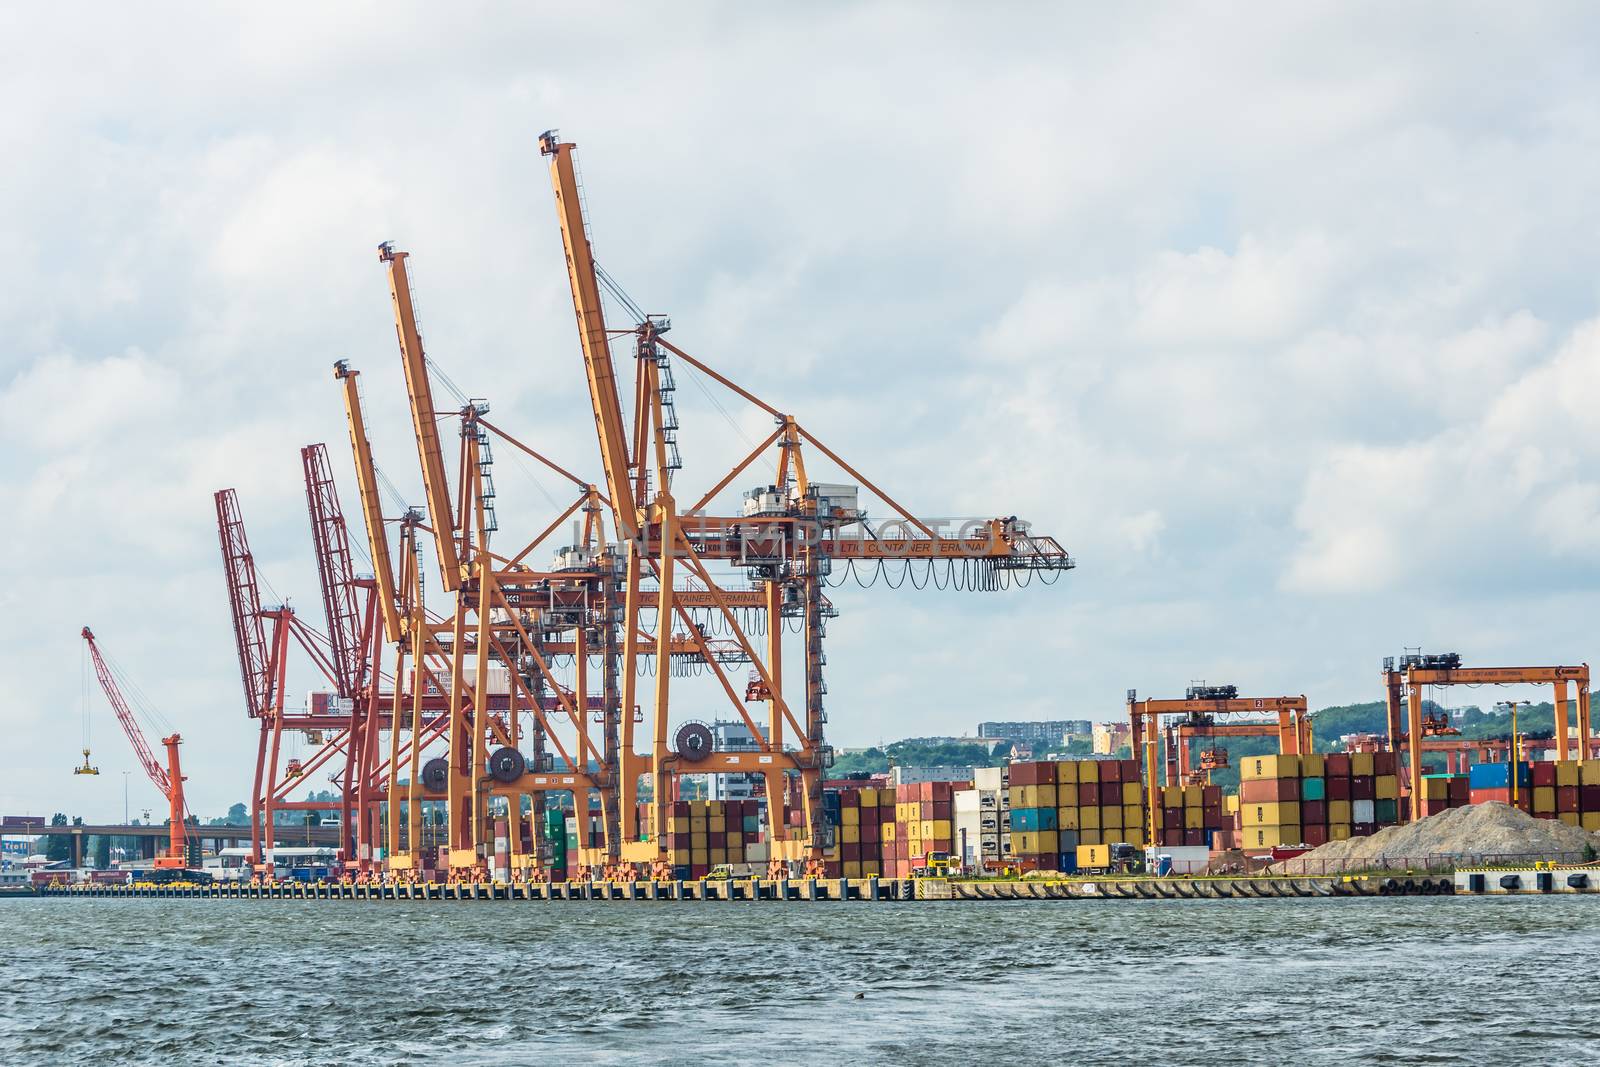 Cargo containers terminal, on July 10, 2013, in the Port of Gdynia - the third largest seaport in Poland, specialized in handling containers, ro-ro and ferry transport.